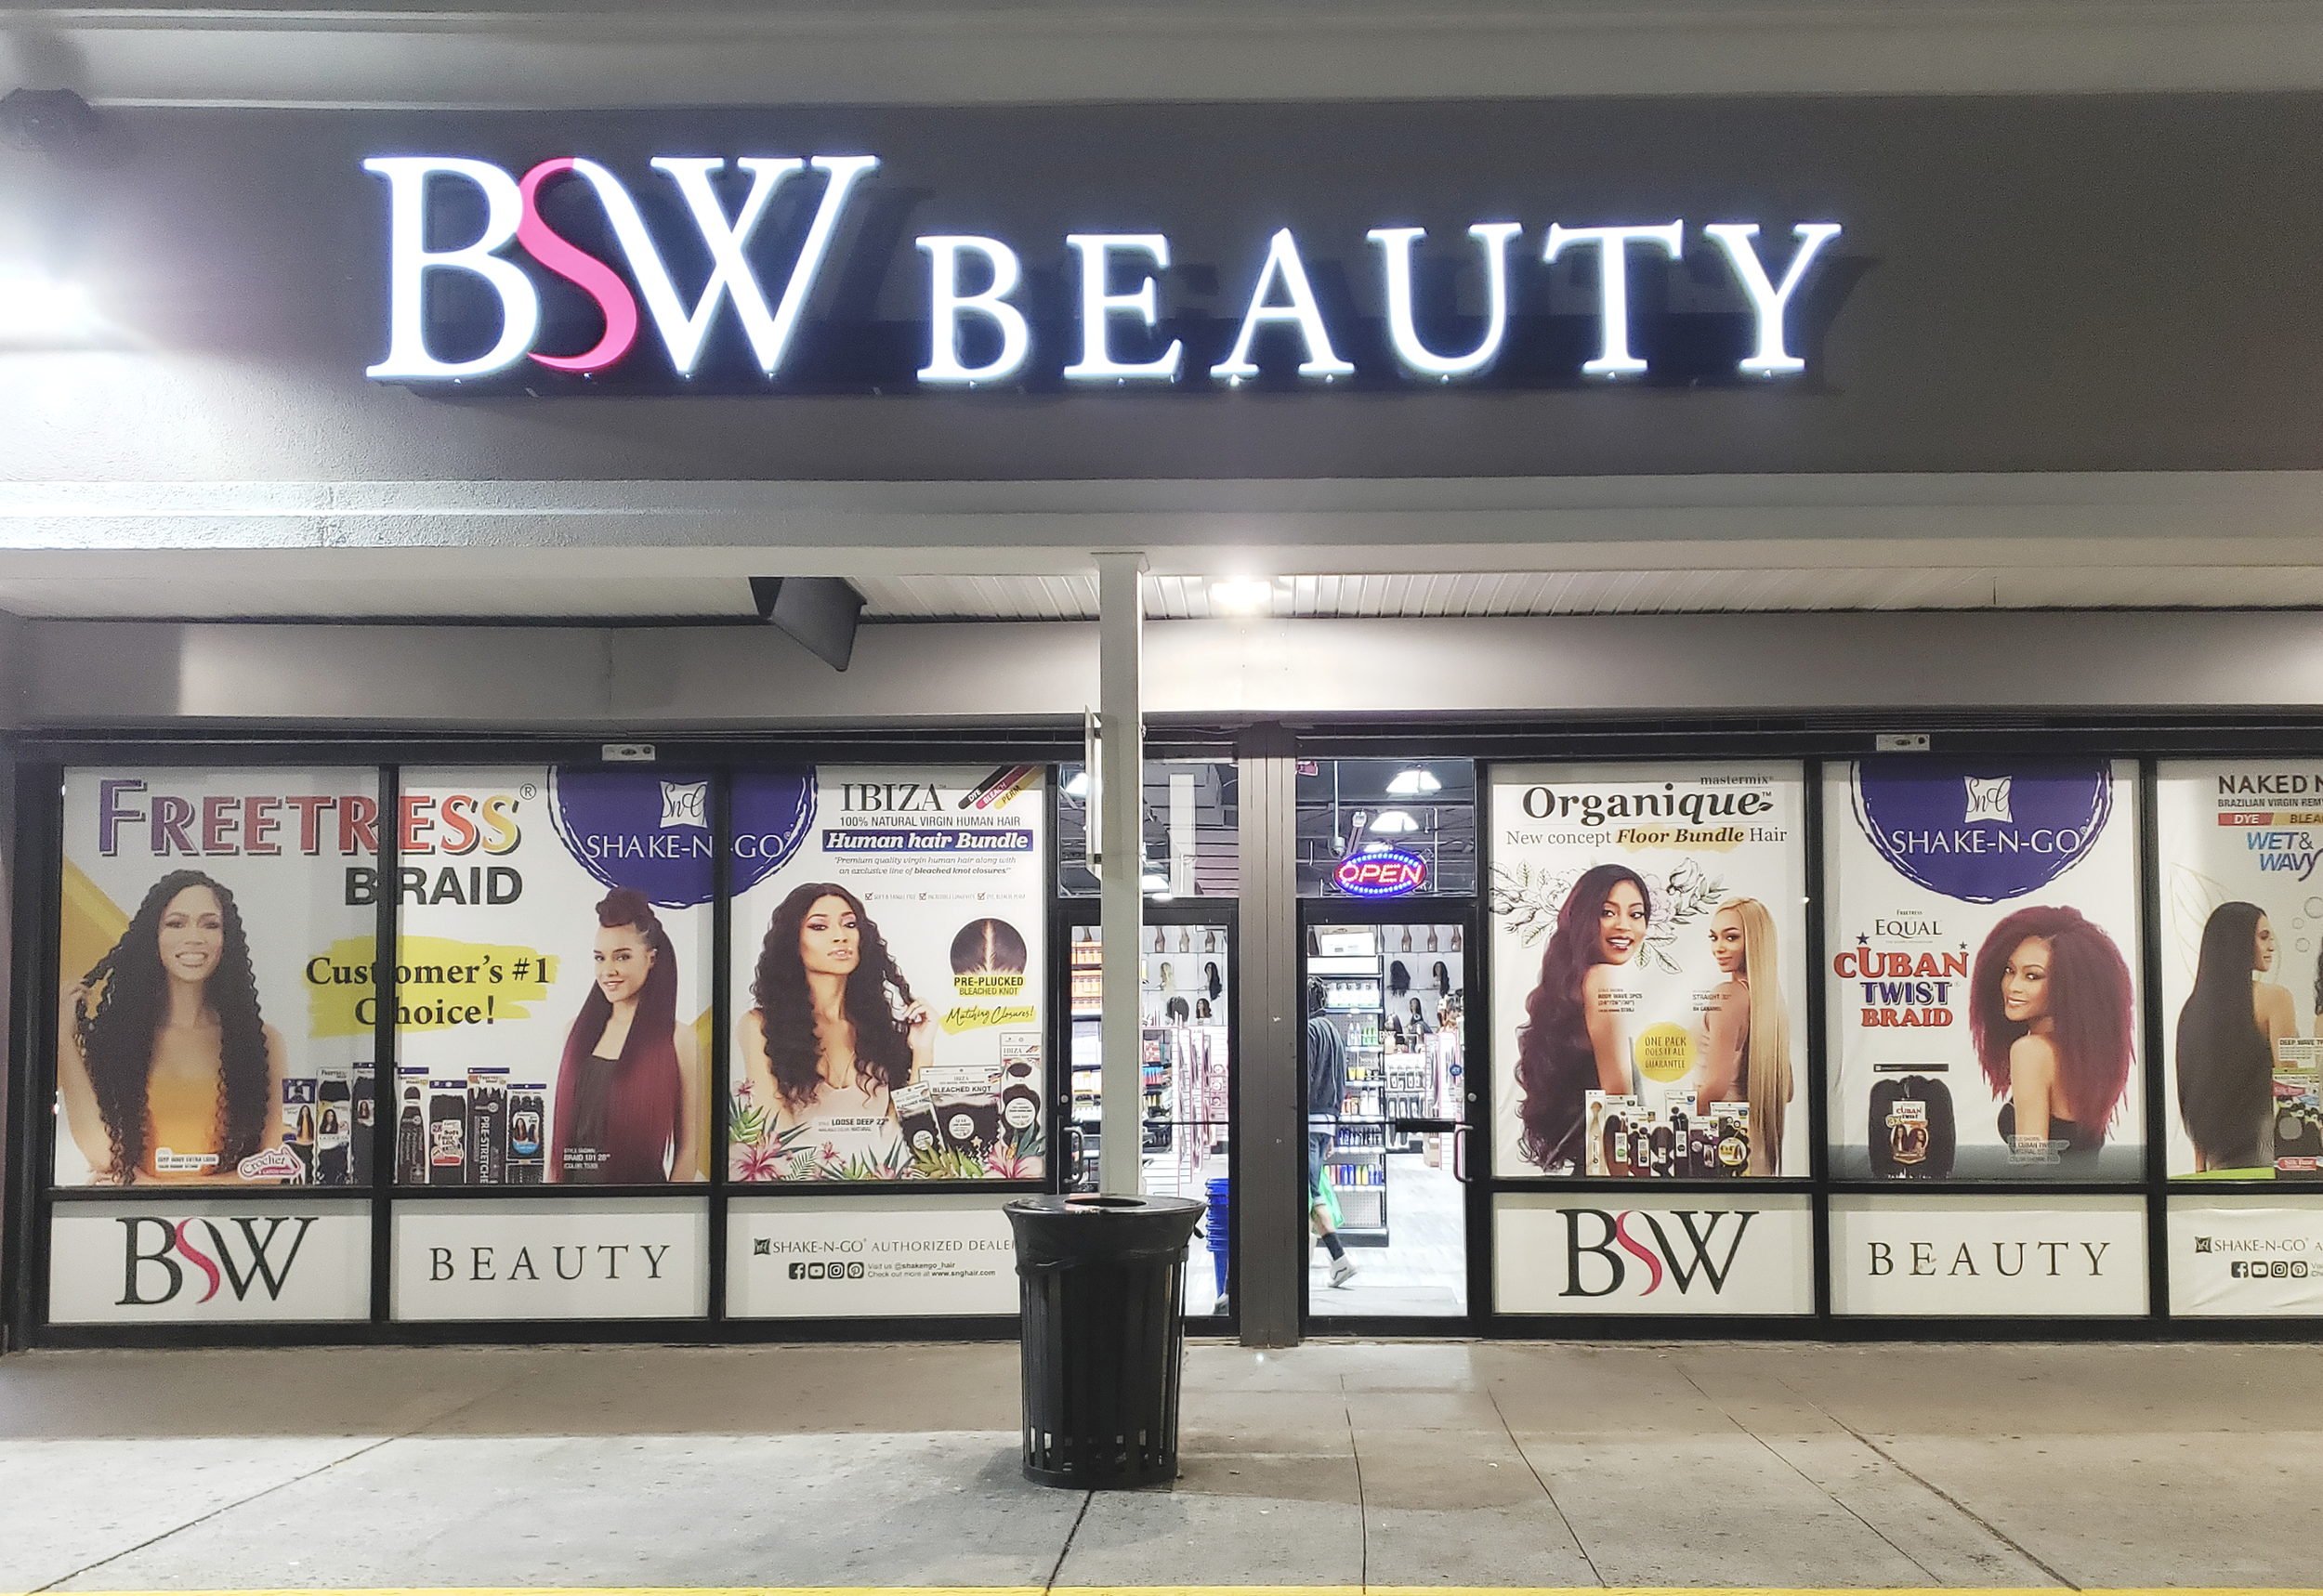 BSW Beauty USA — BSW/PPF GROUP